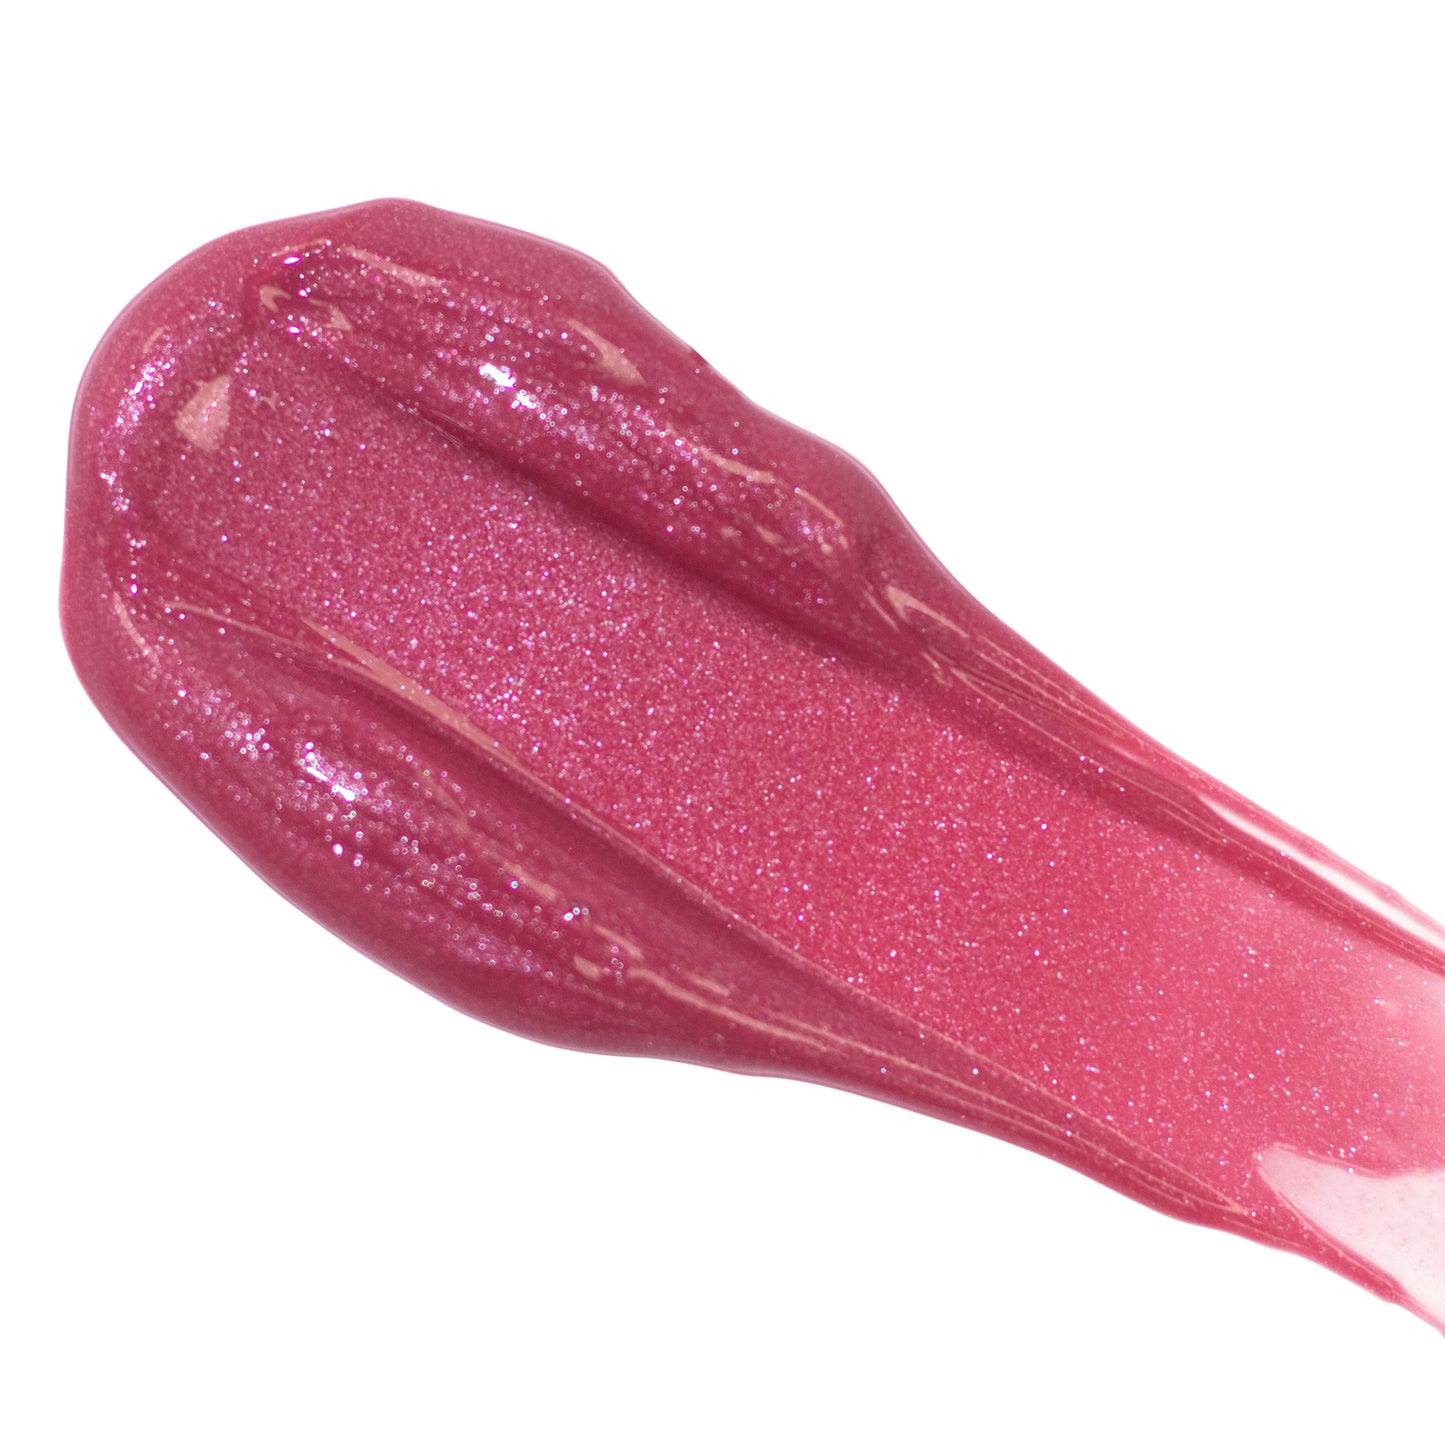 FitGlow Lip Serum - Bloom - sheer berry shine colour with white background